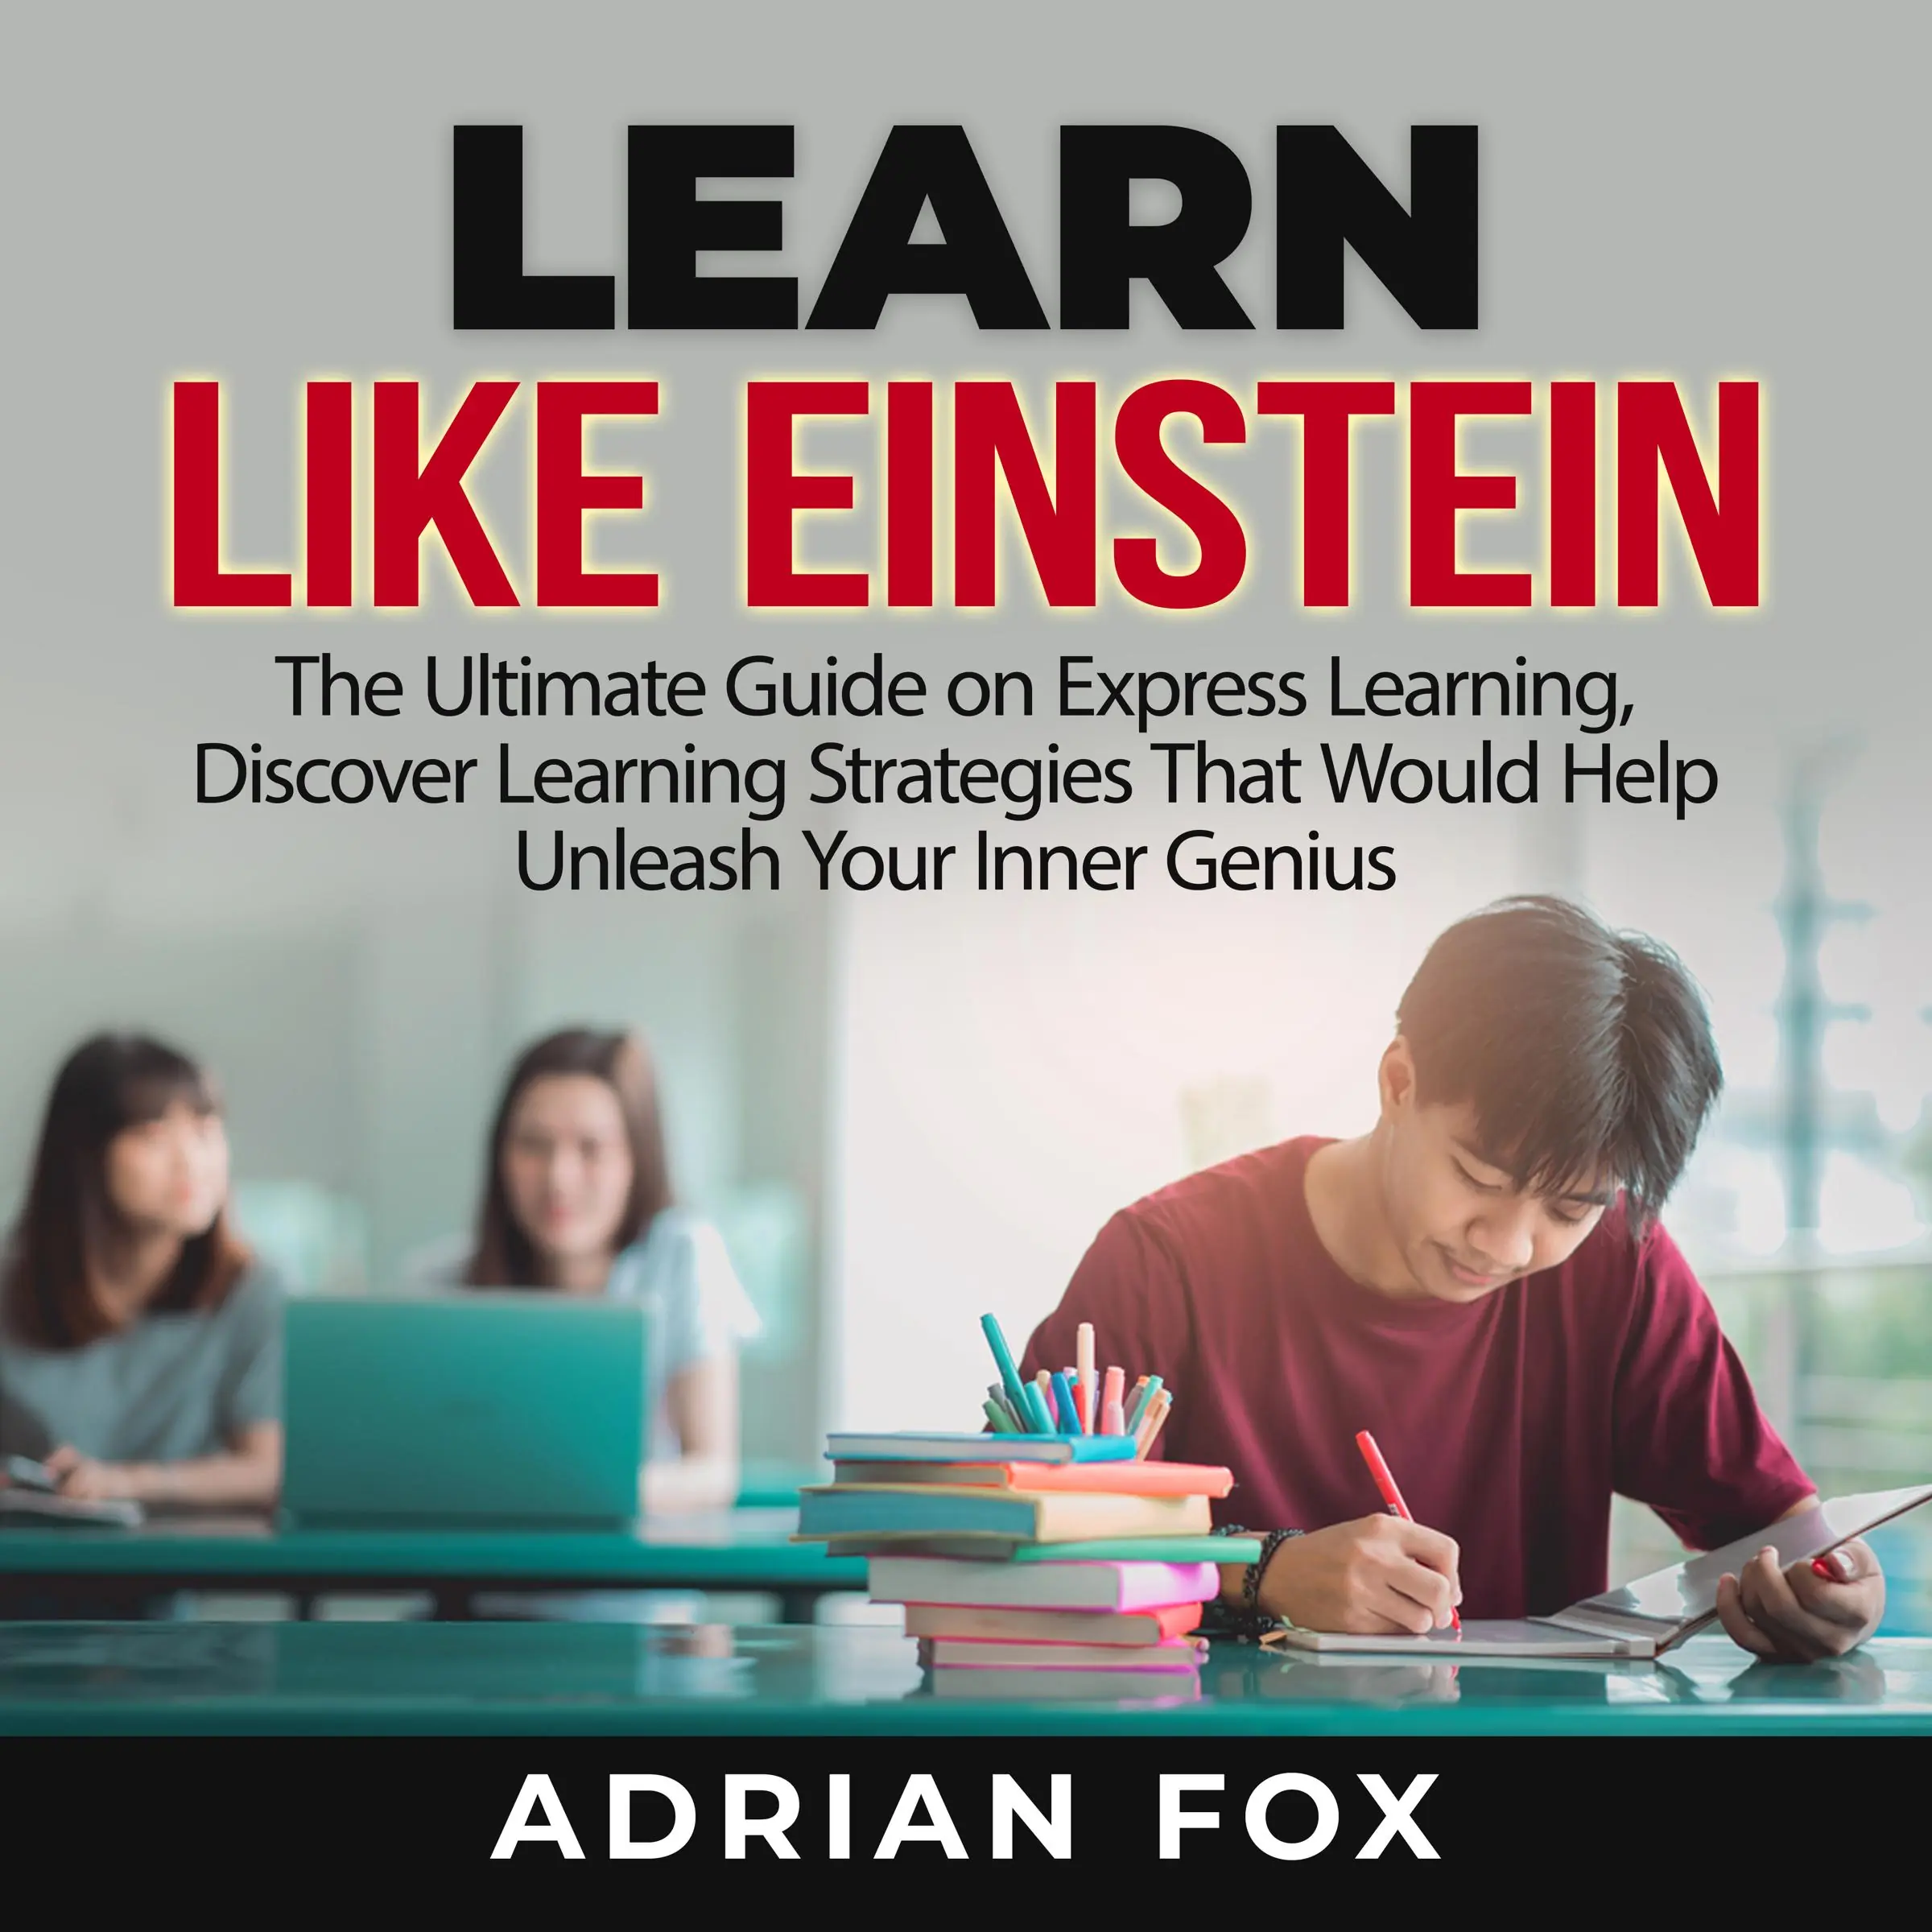 Learn Like Einstein: The Ultimate Guide on Express Learning, Discover Learning Strategies That Would Help Unleash Your Inner Genius Audiobook by Adrian Fox